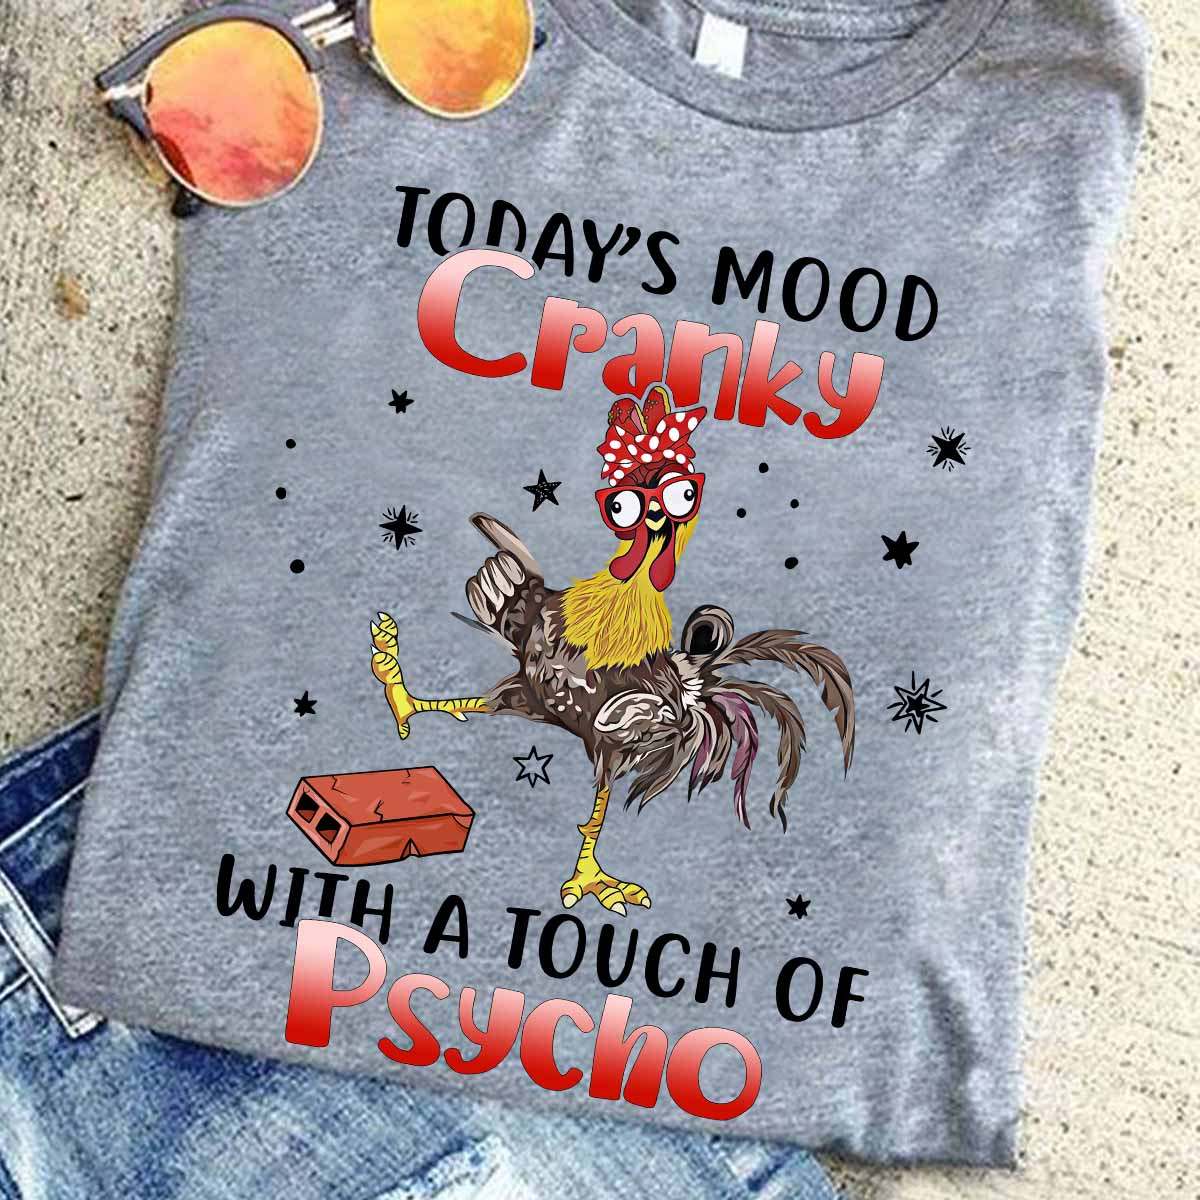 Today's mood cranky with a touch of Psycho - Cranky chicken